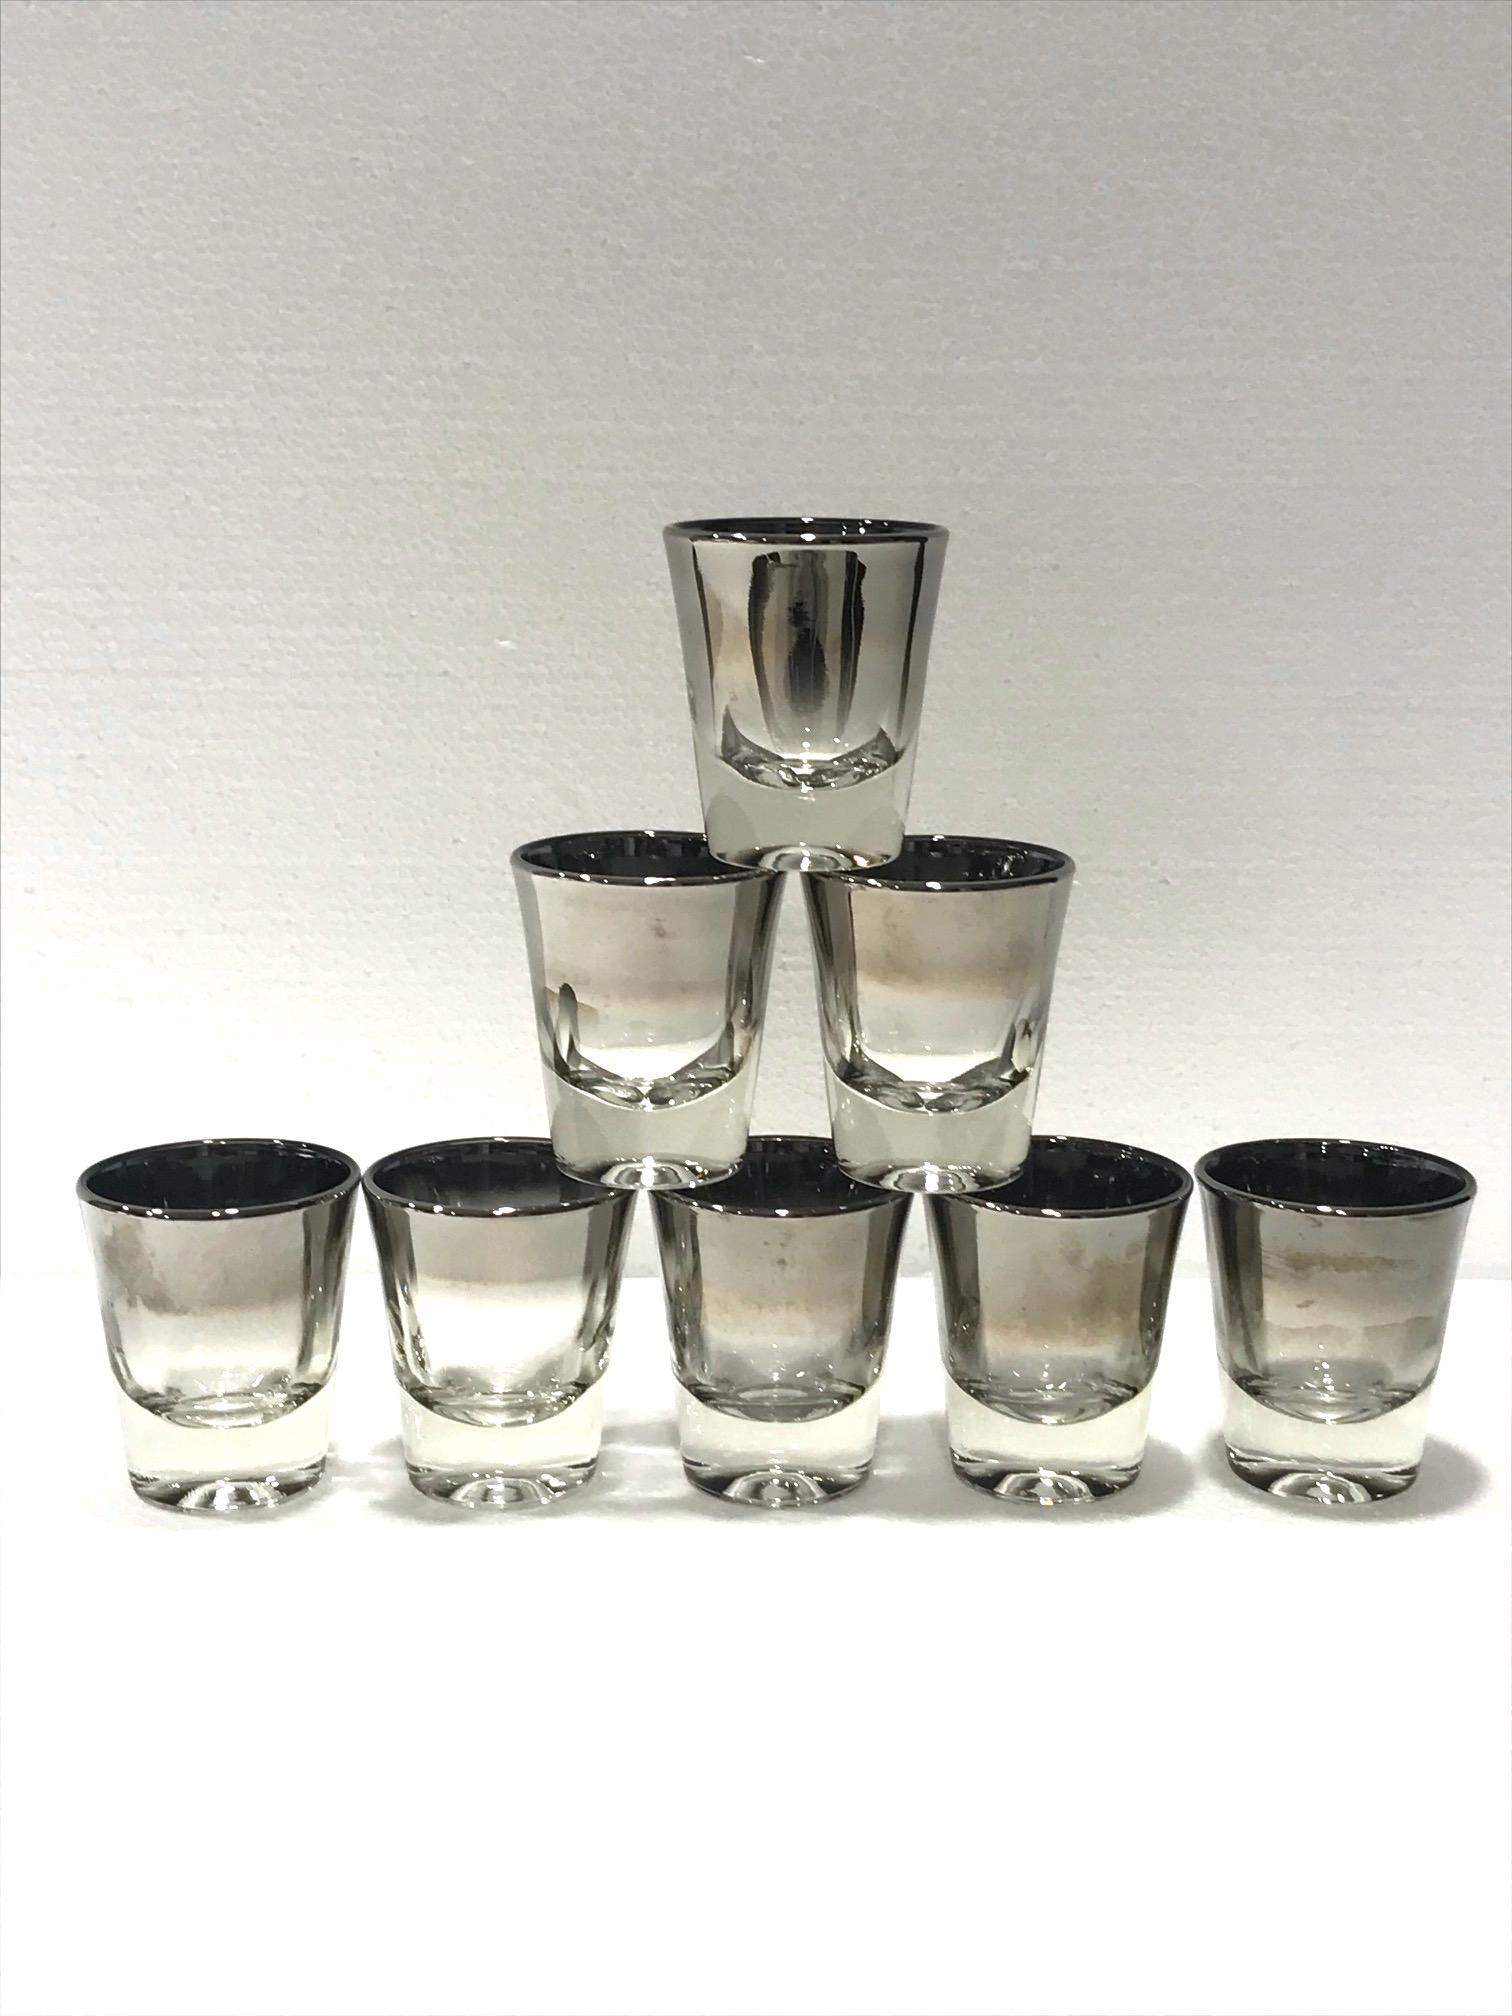 Iconic Mid-Century Modern barware shot glasses set with silver fade overlay design. Gorgeous shot glasses with tapered forms and gradient hues of gunmetal silver along the rims. Makes a chic addition to any barware set.
 
  